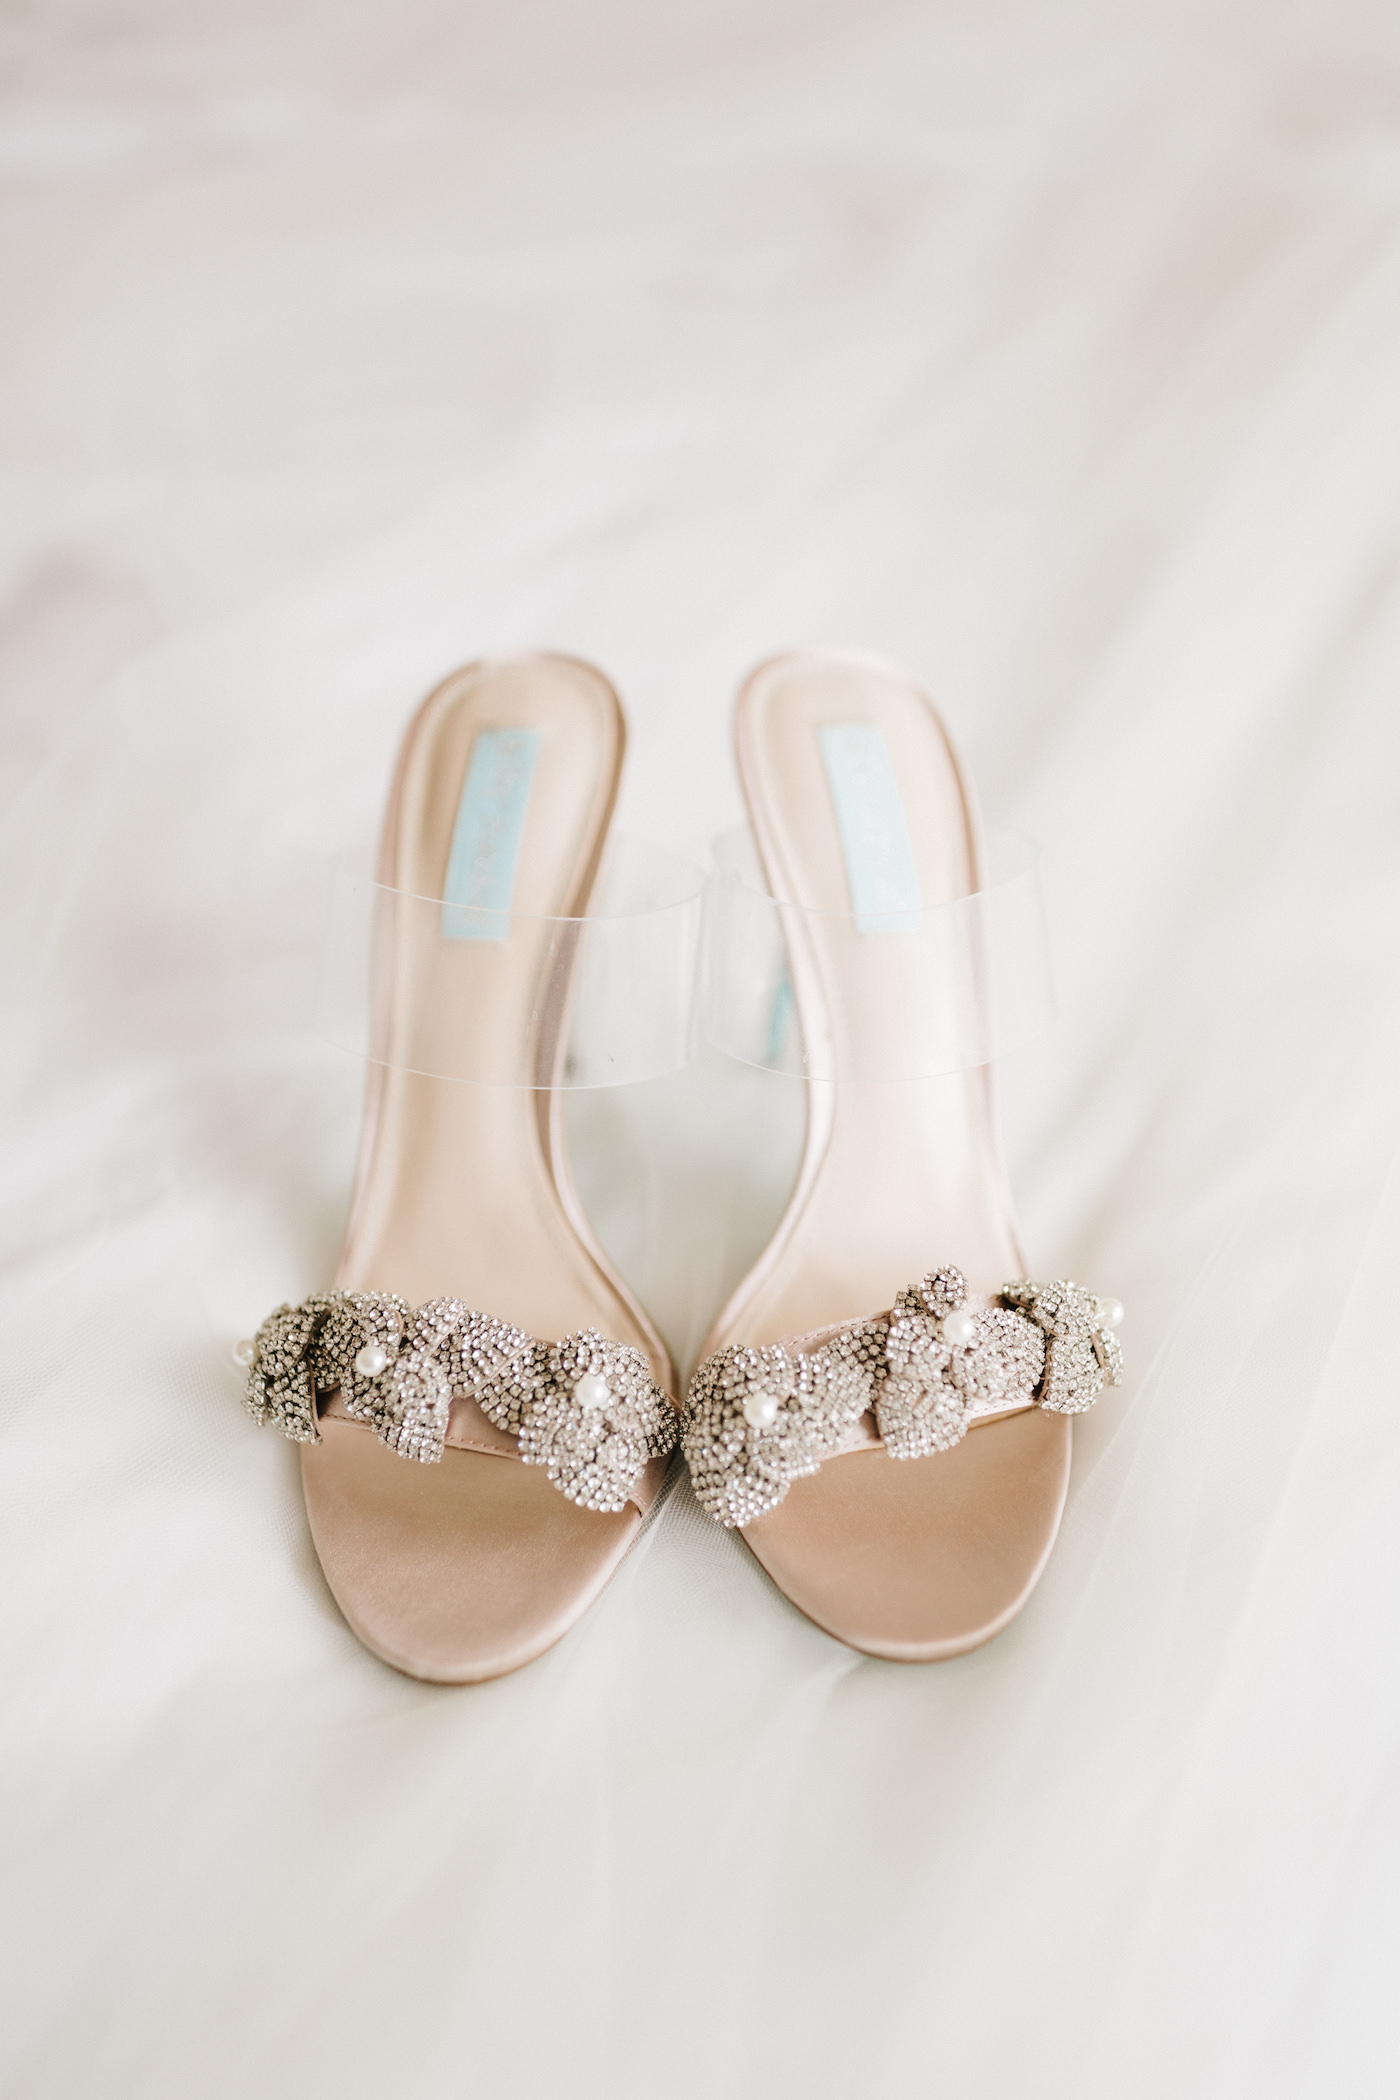 Florida Wedding Details, Betsey Johnson Bridal Shoes, Floral Crystal Floral Embellishment, Clear Strap Open Toe Heels | Tampa Bay Wedding Planner Parties A’ La Carte